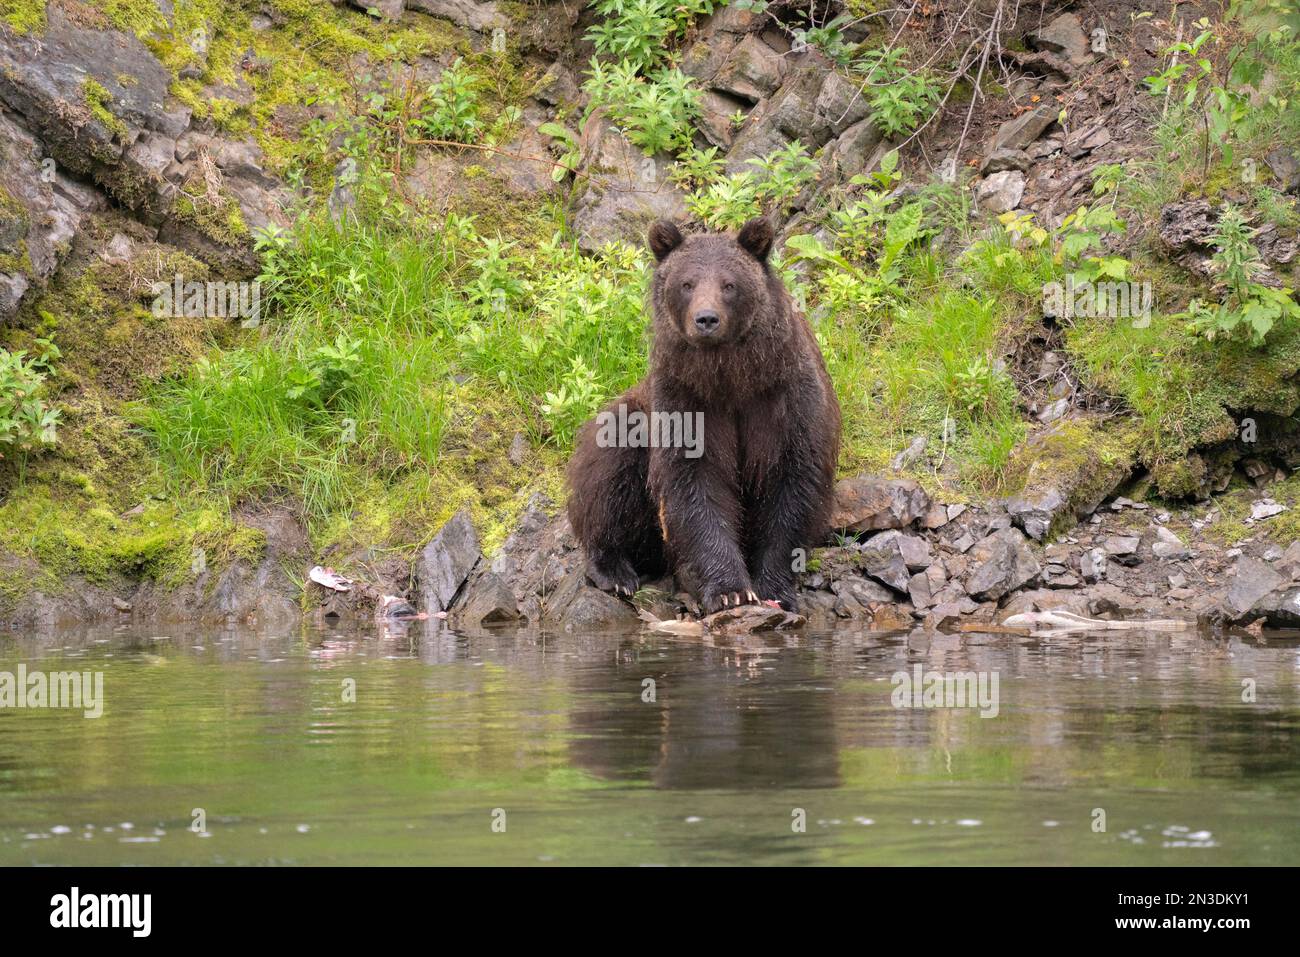 Close-up of a grizzly bear (Ursus arctos horribilis) sitting at the water's edge of the river; Atlin, British Columbia, Canada Stock Photo